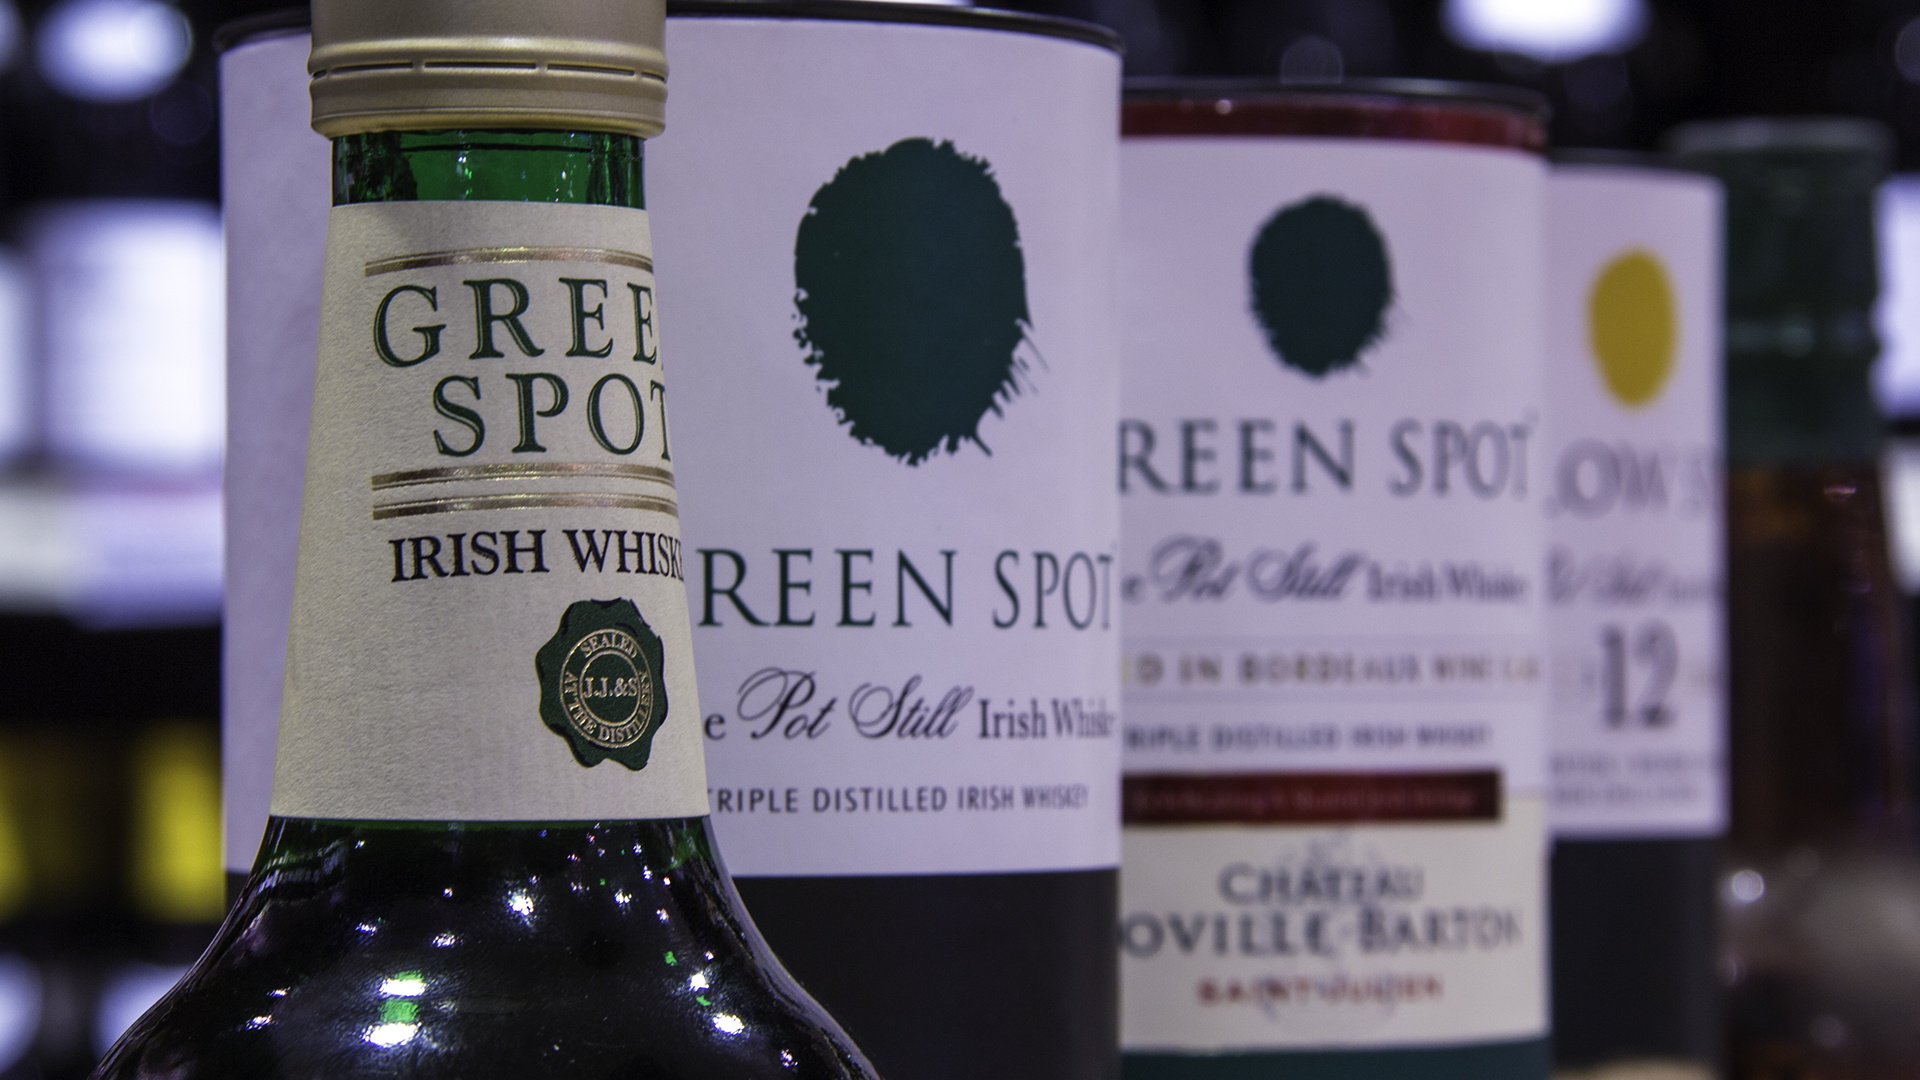 Green Spot bottles past and present at Mitchell & Son in Dublin. Photo ©2017, Mark Gillespie/CaskStrength Media.